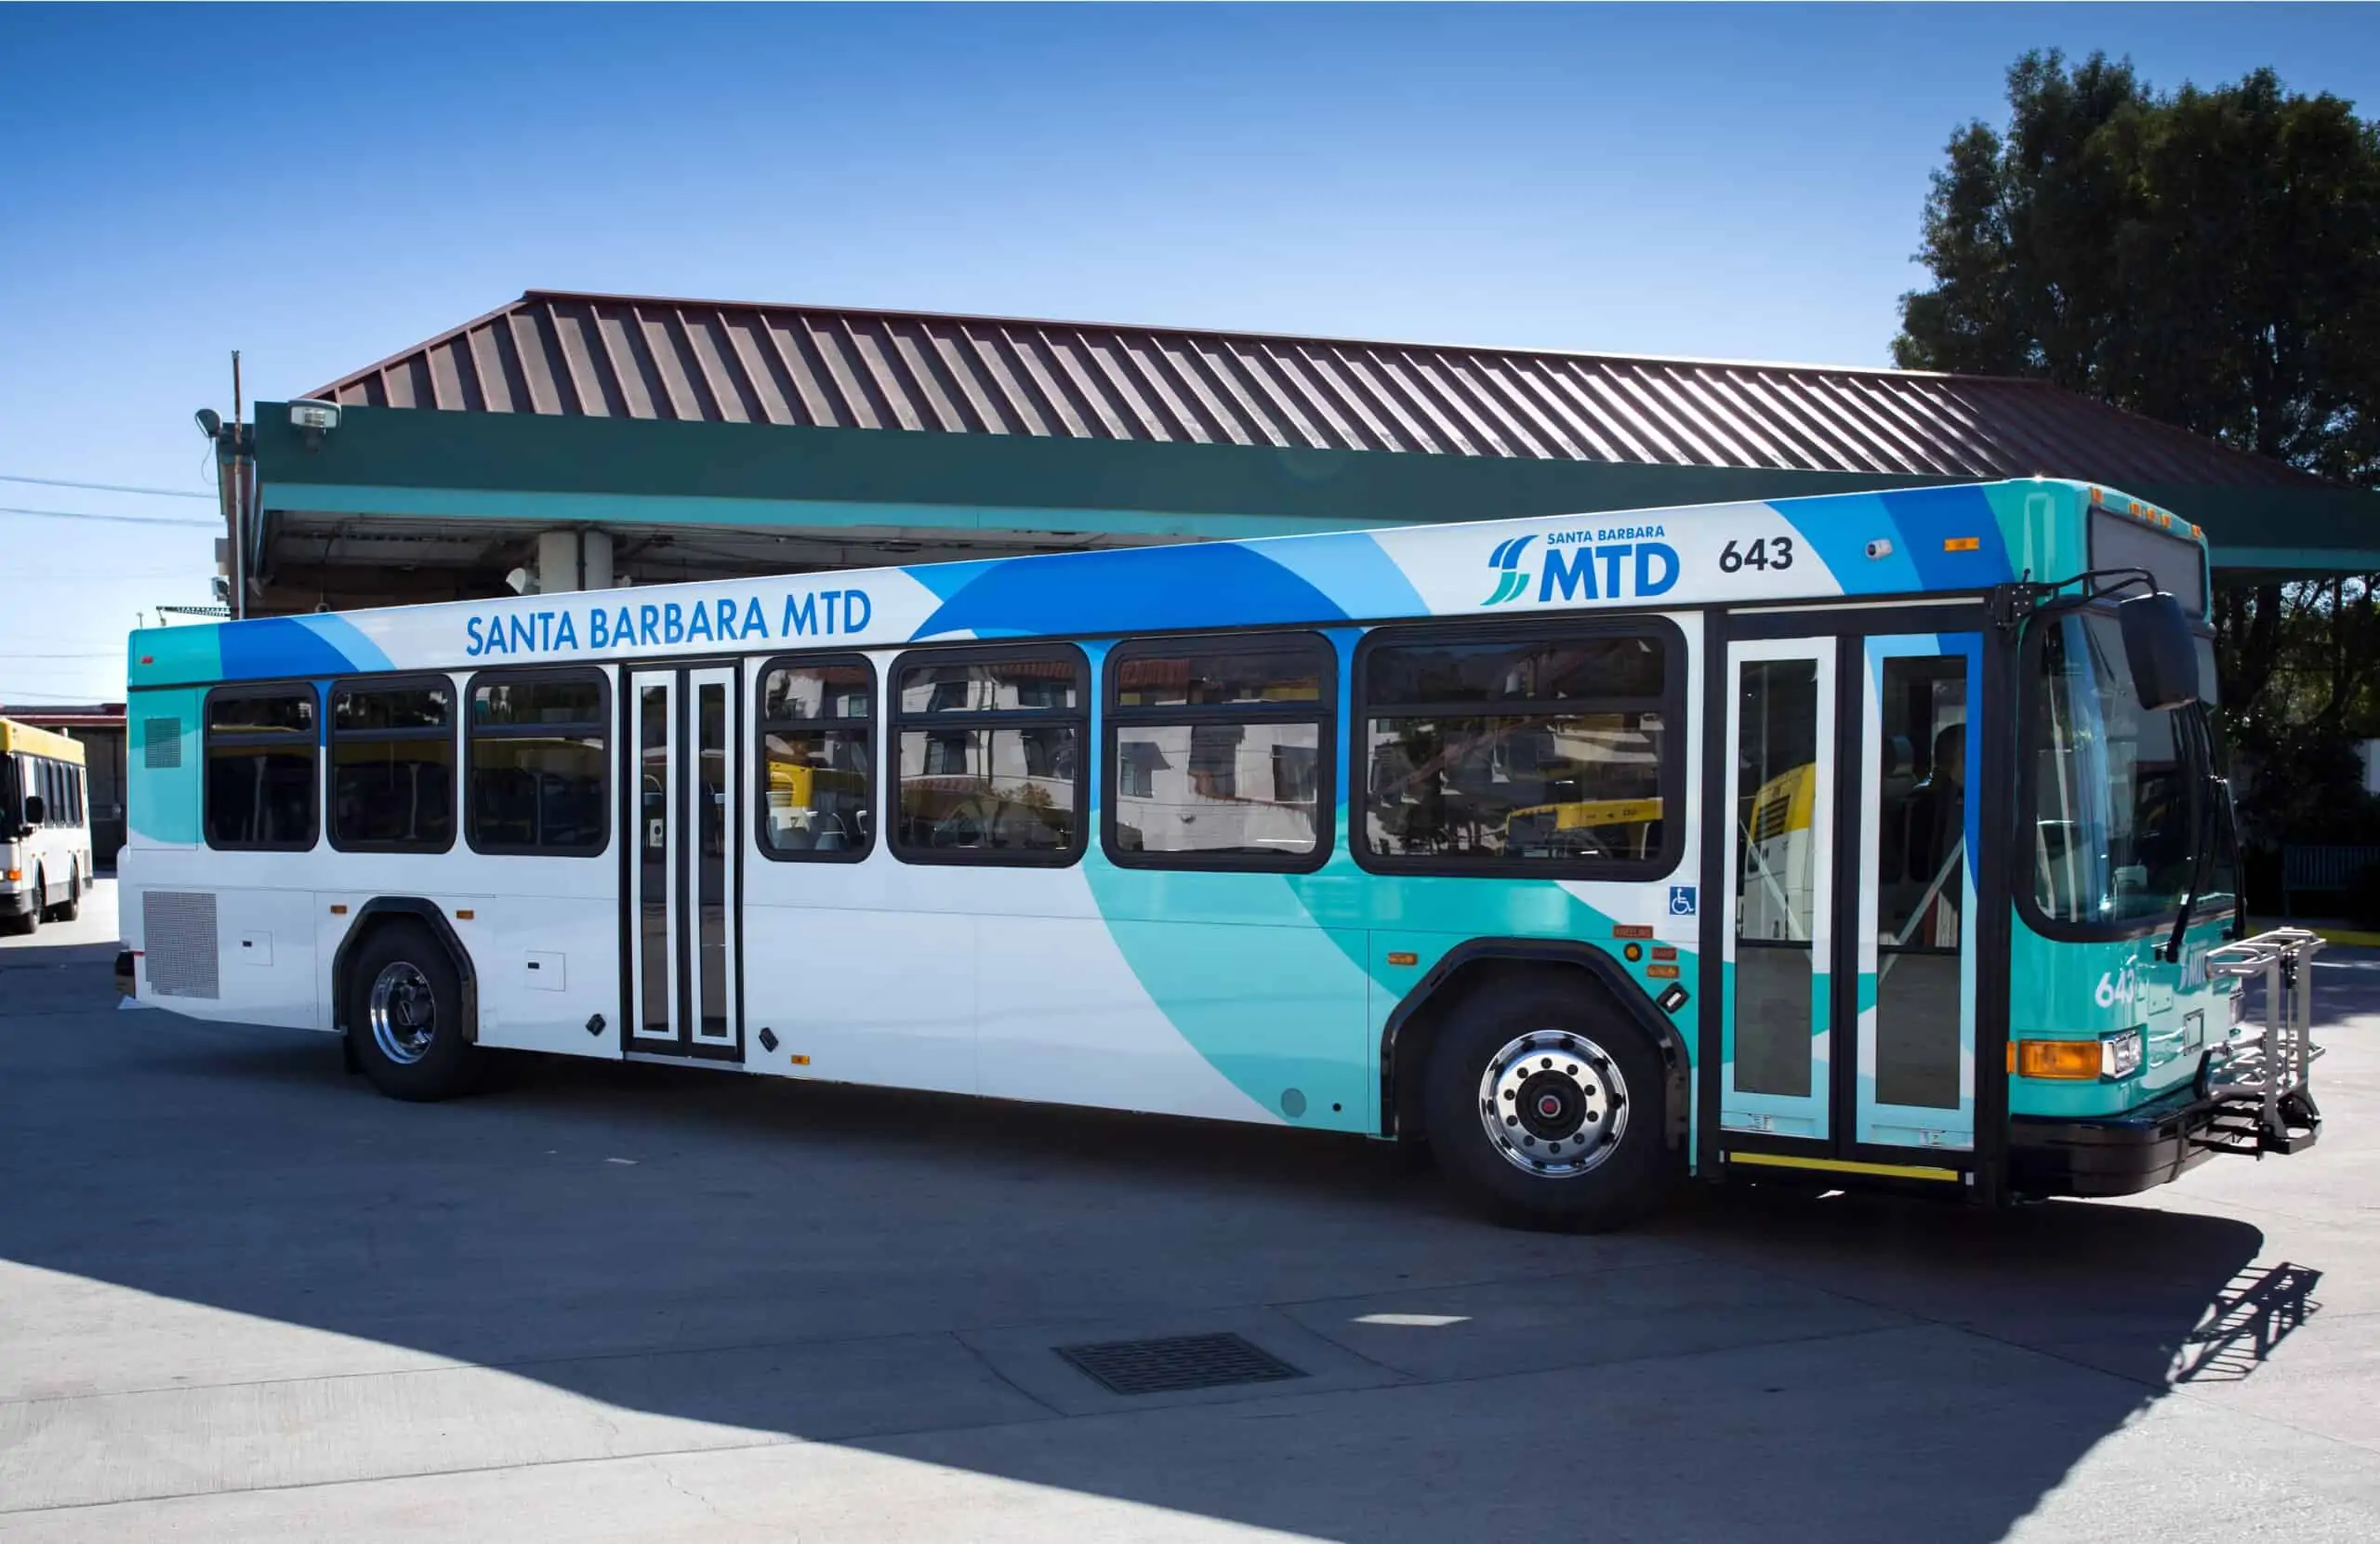 mtd bus with blue, teal and white paint scheme